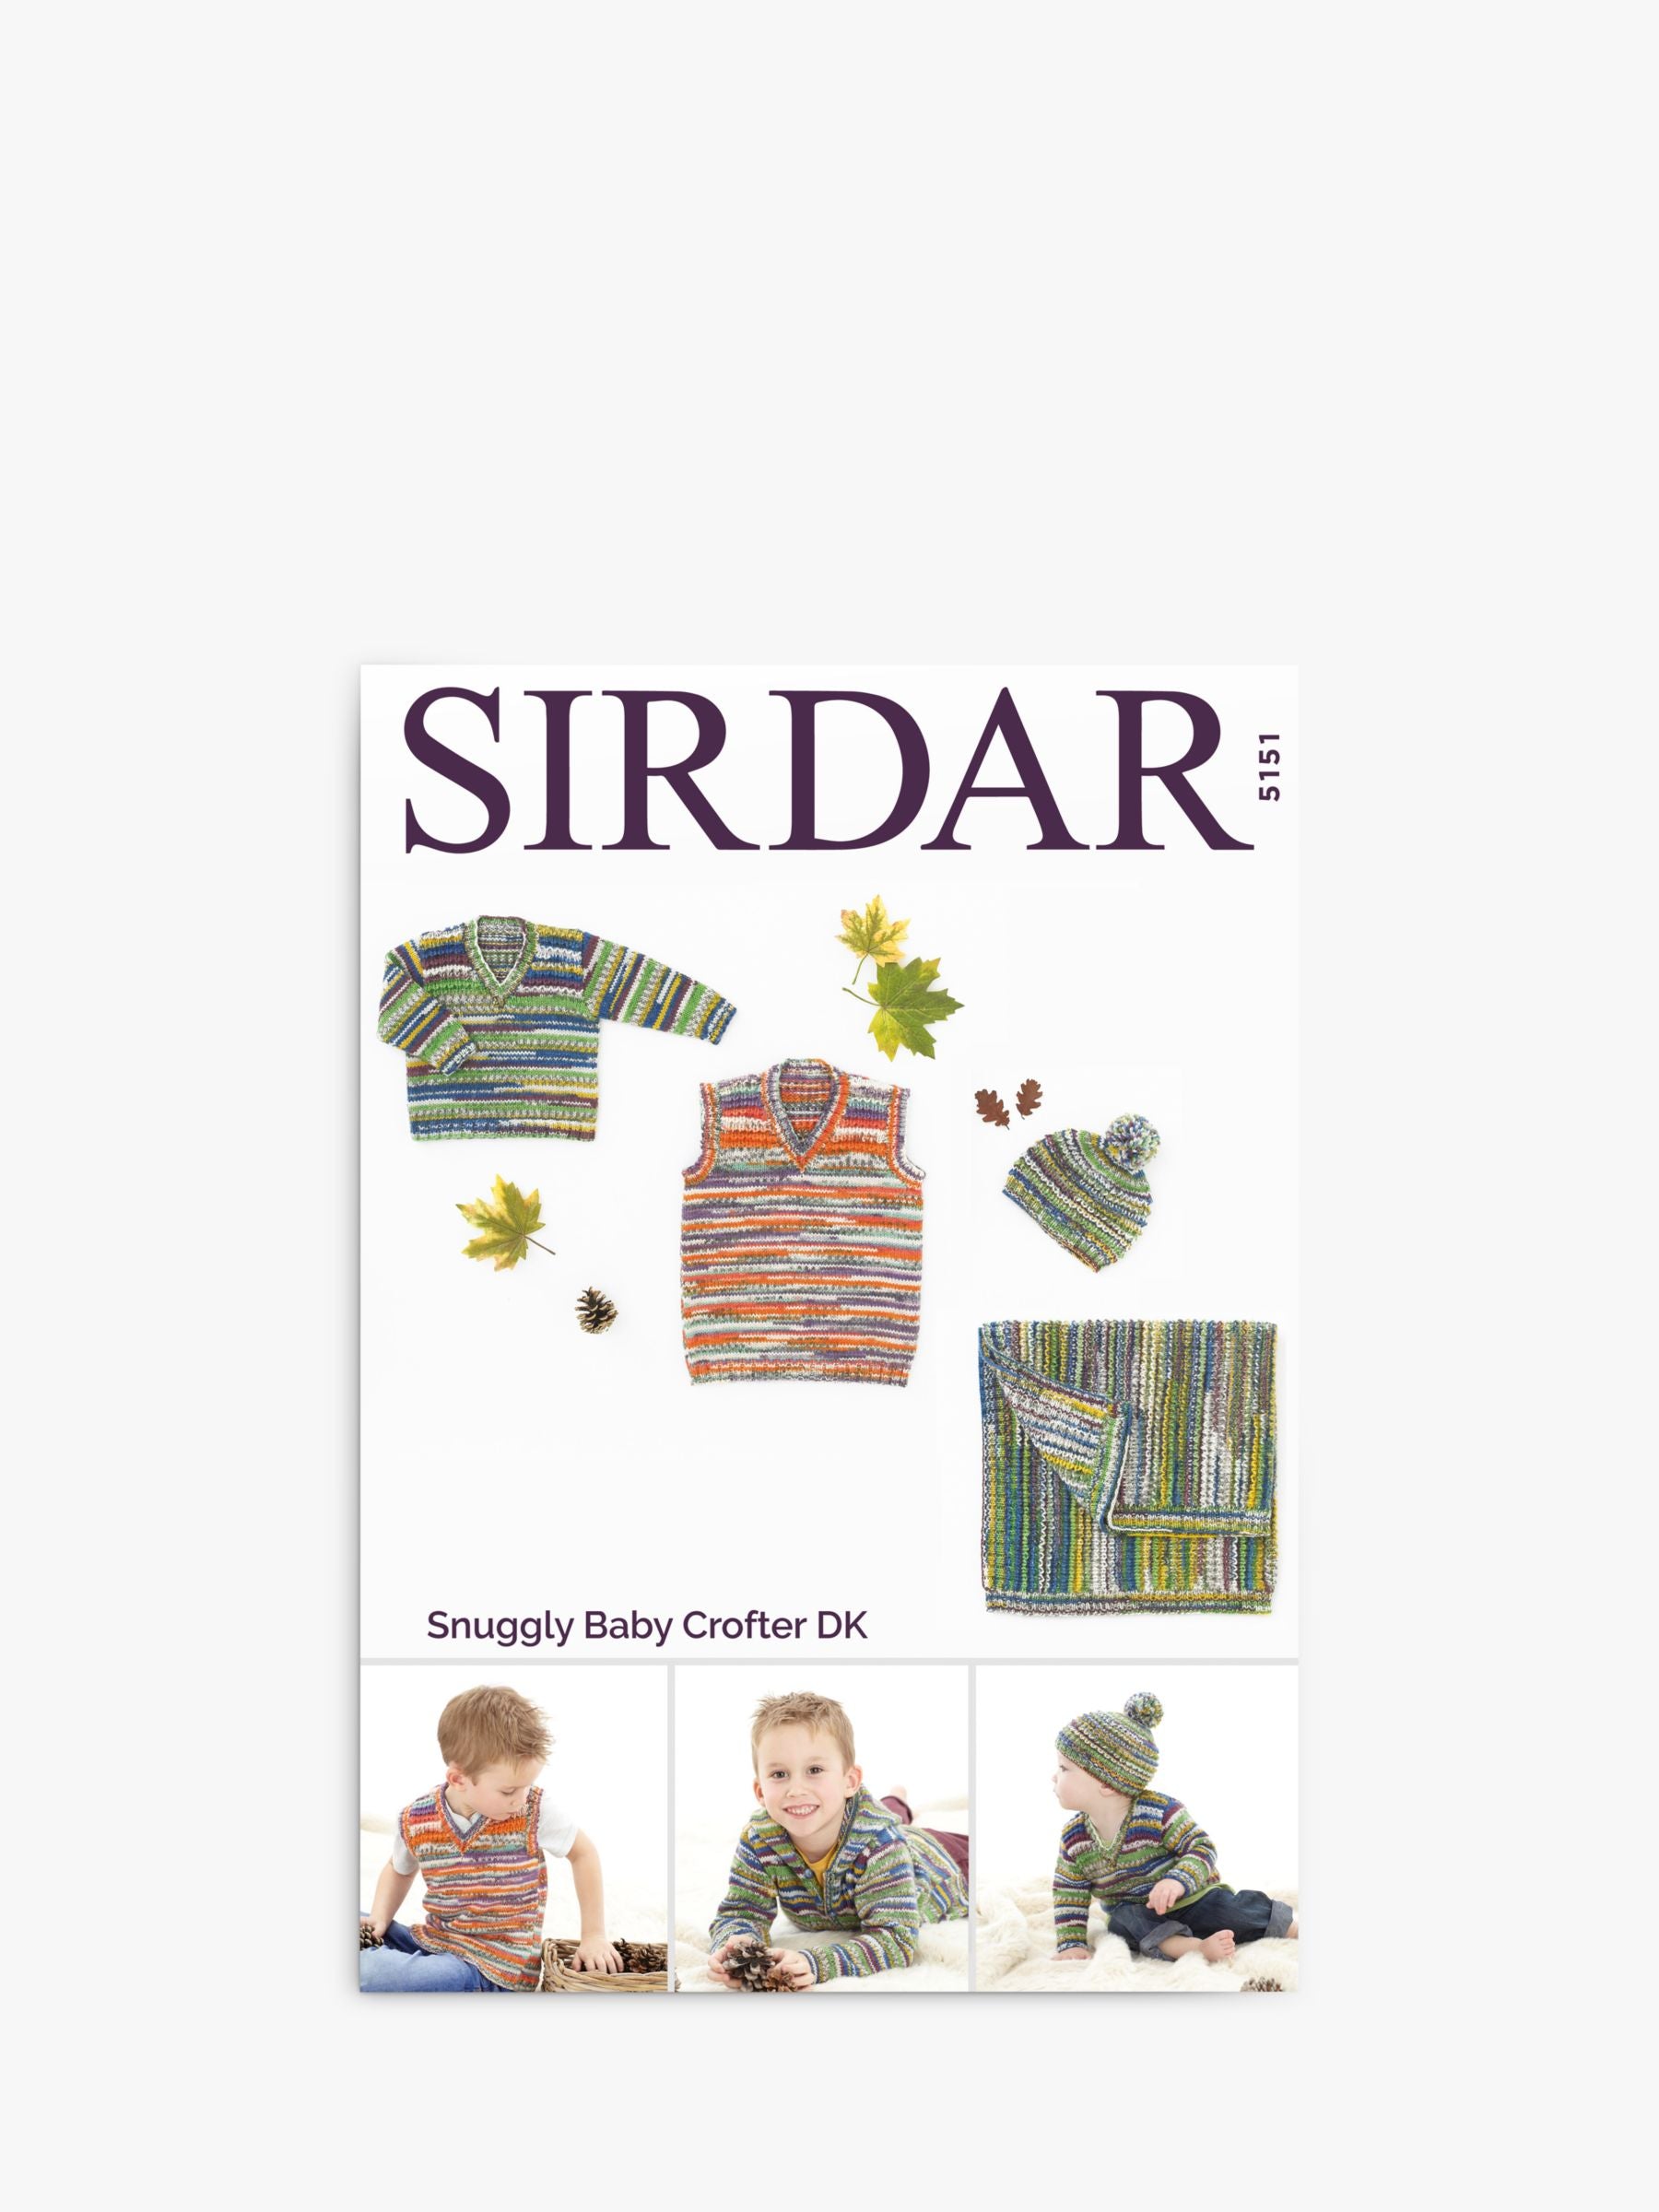 Sirdar 5151 Sweater, Tank top, Hat and Blanket in Snuggly Baby Crofter DK